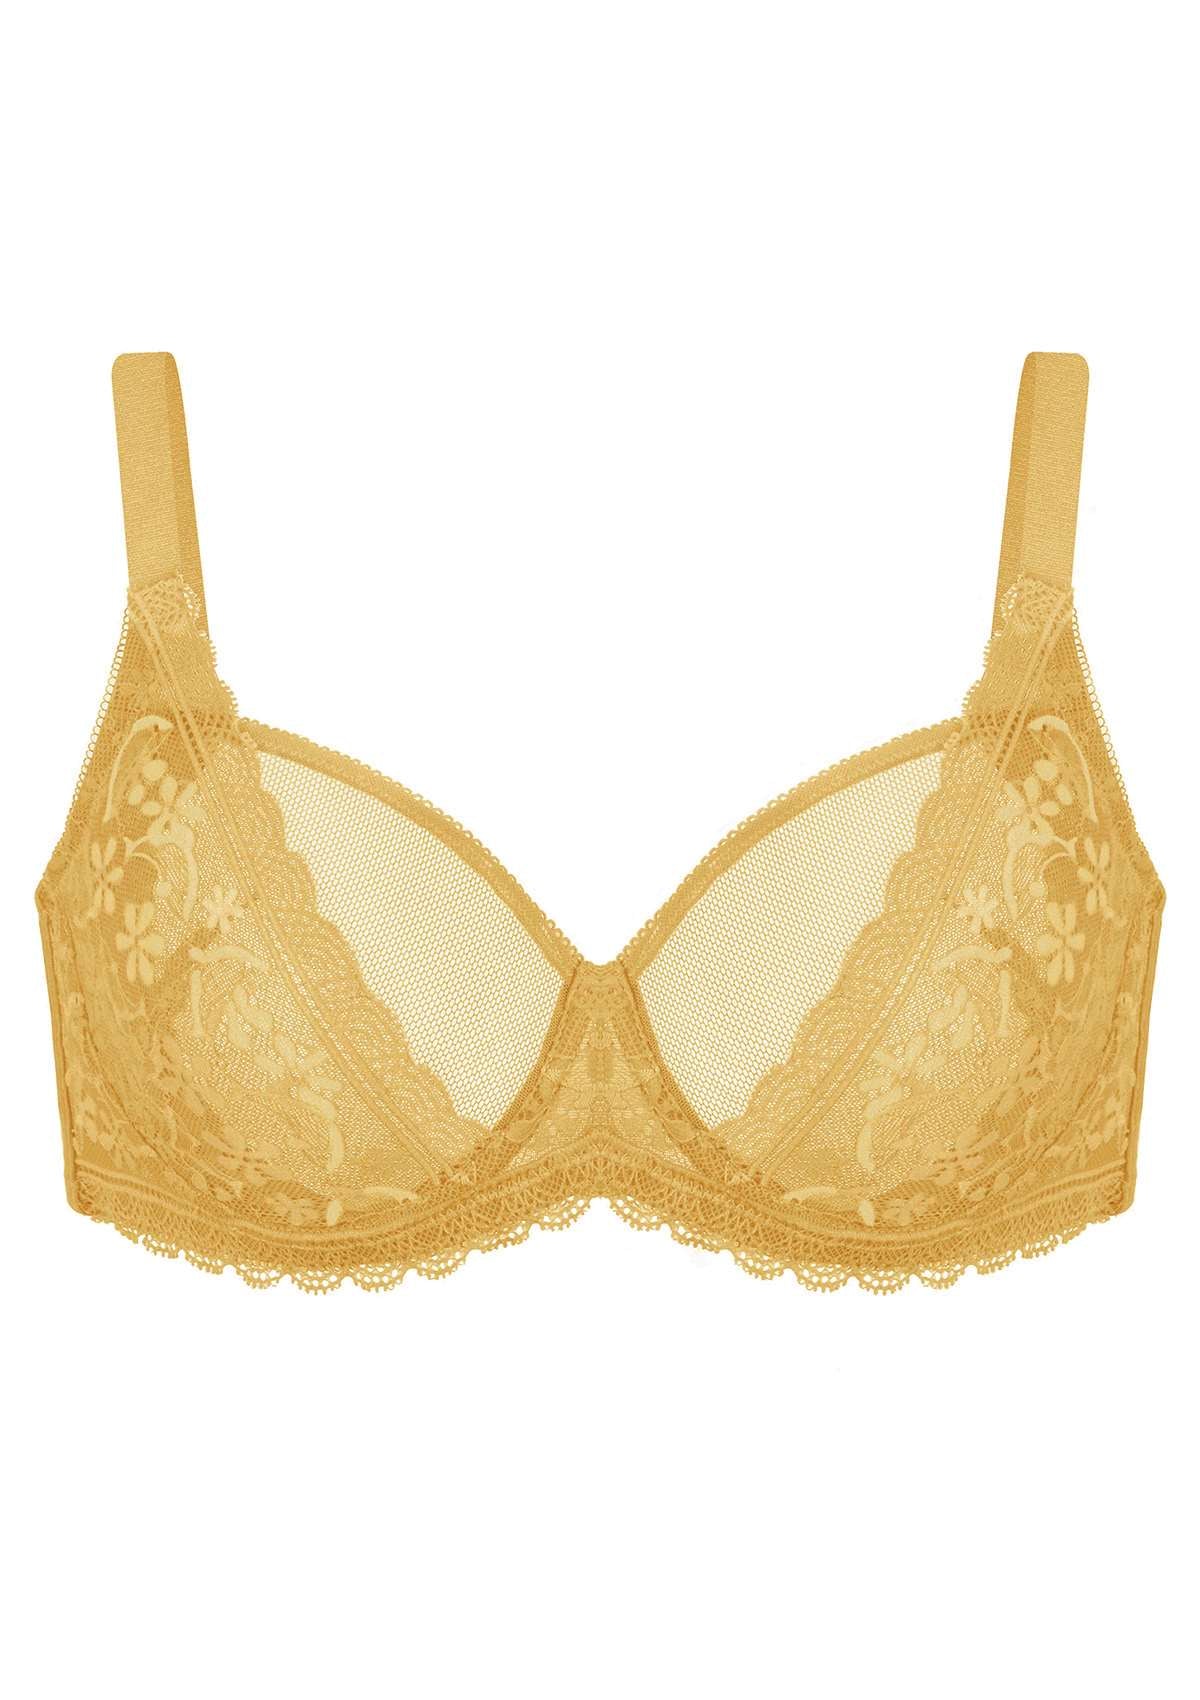 HSIA Anemone Lace Unlined Bra: Supportive, Lightweight Bra - Ginger / 34 / D